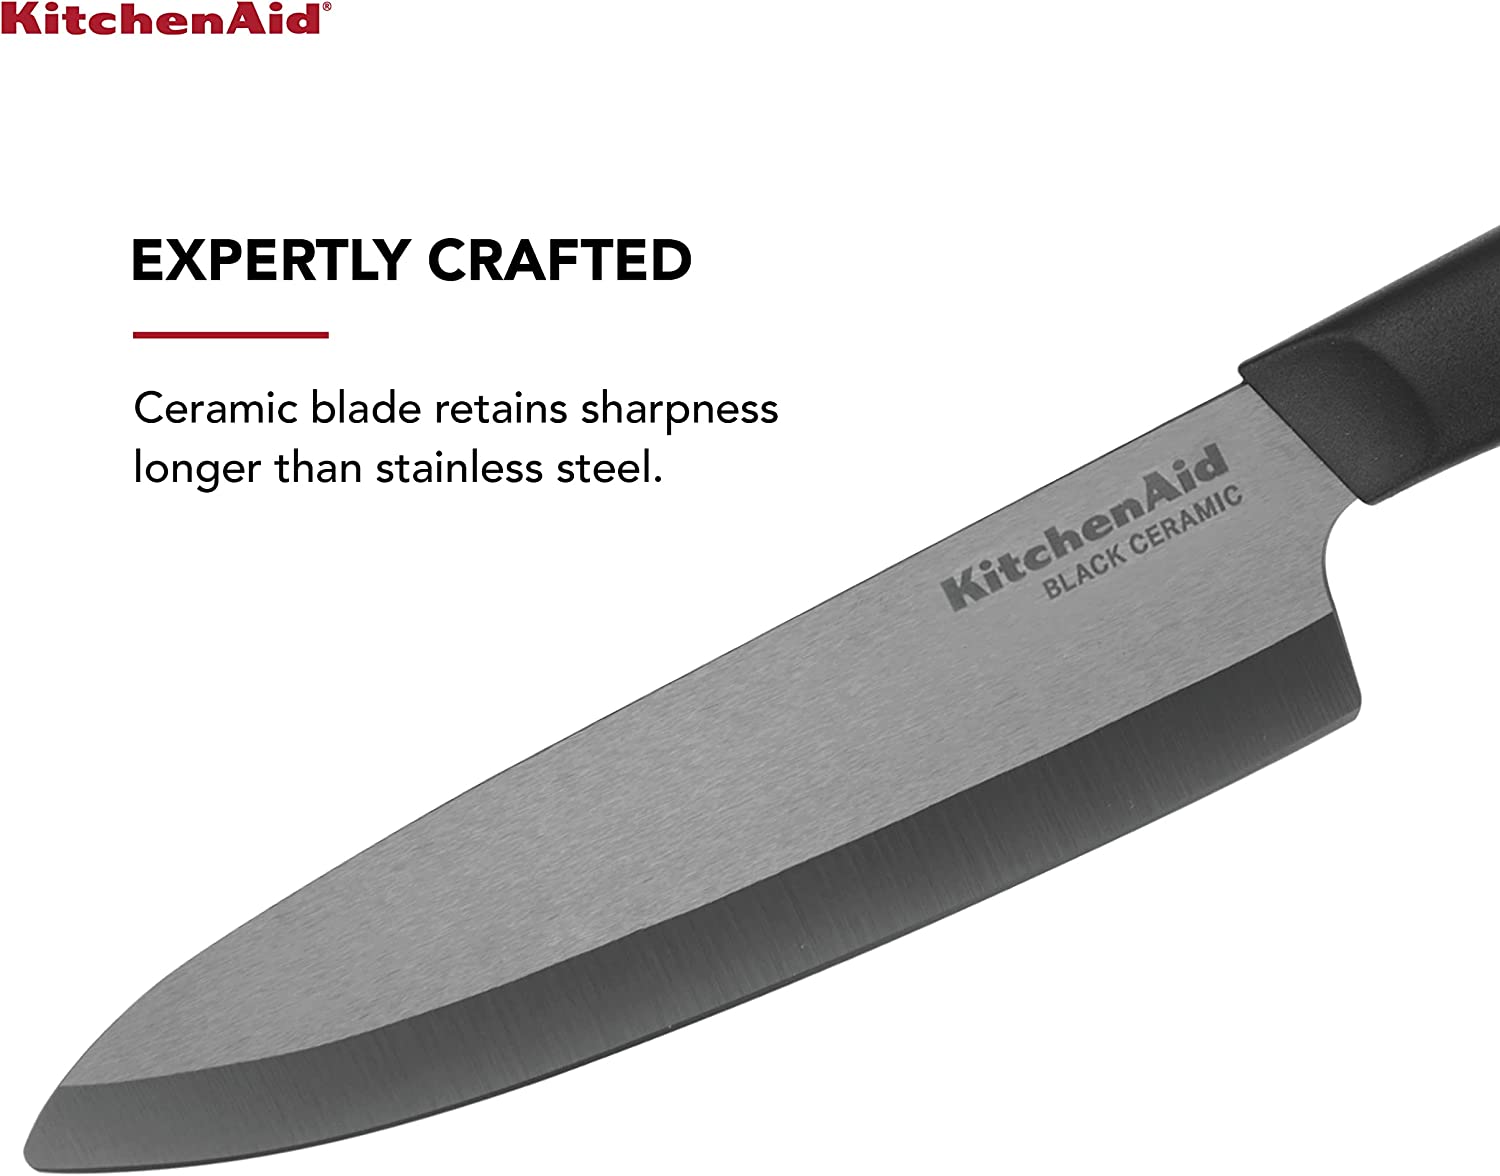 A Review on Ceramic Knife